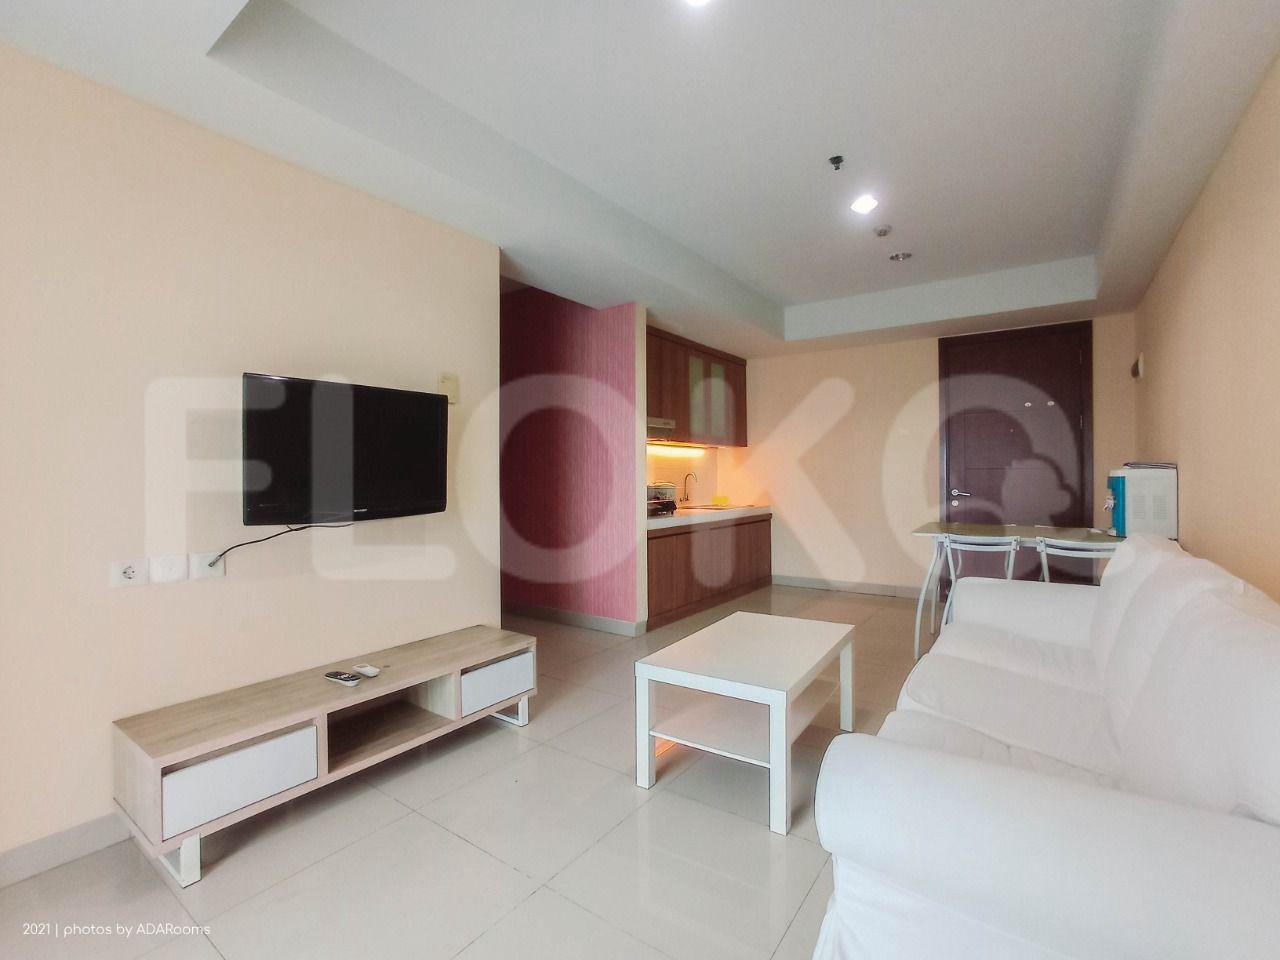 2 Bedroom on 12th Floor fpa2a4 for Rent in Springhill Terrace Residence